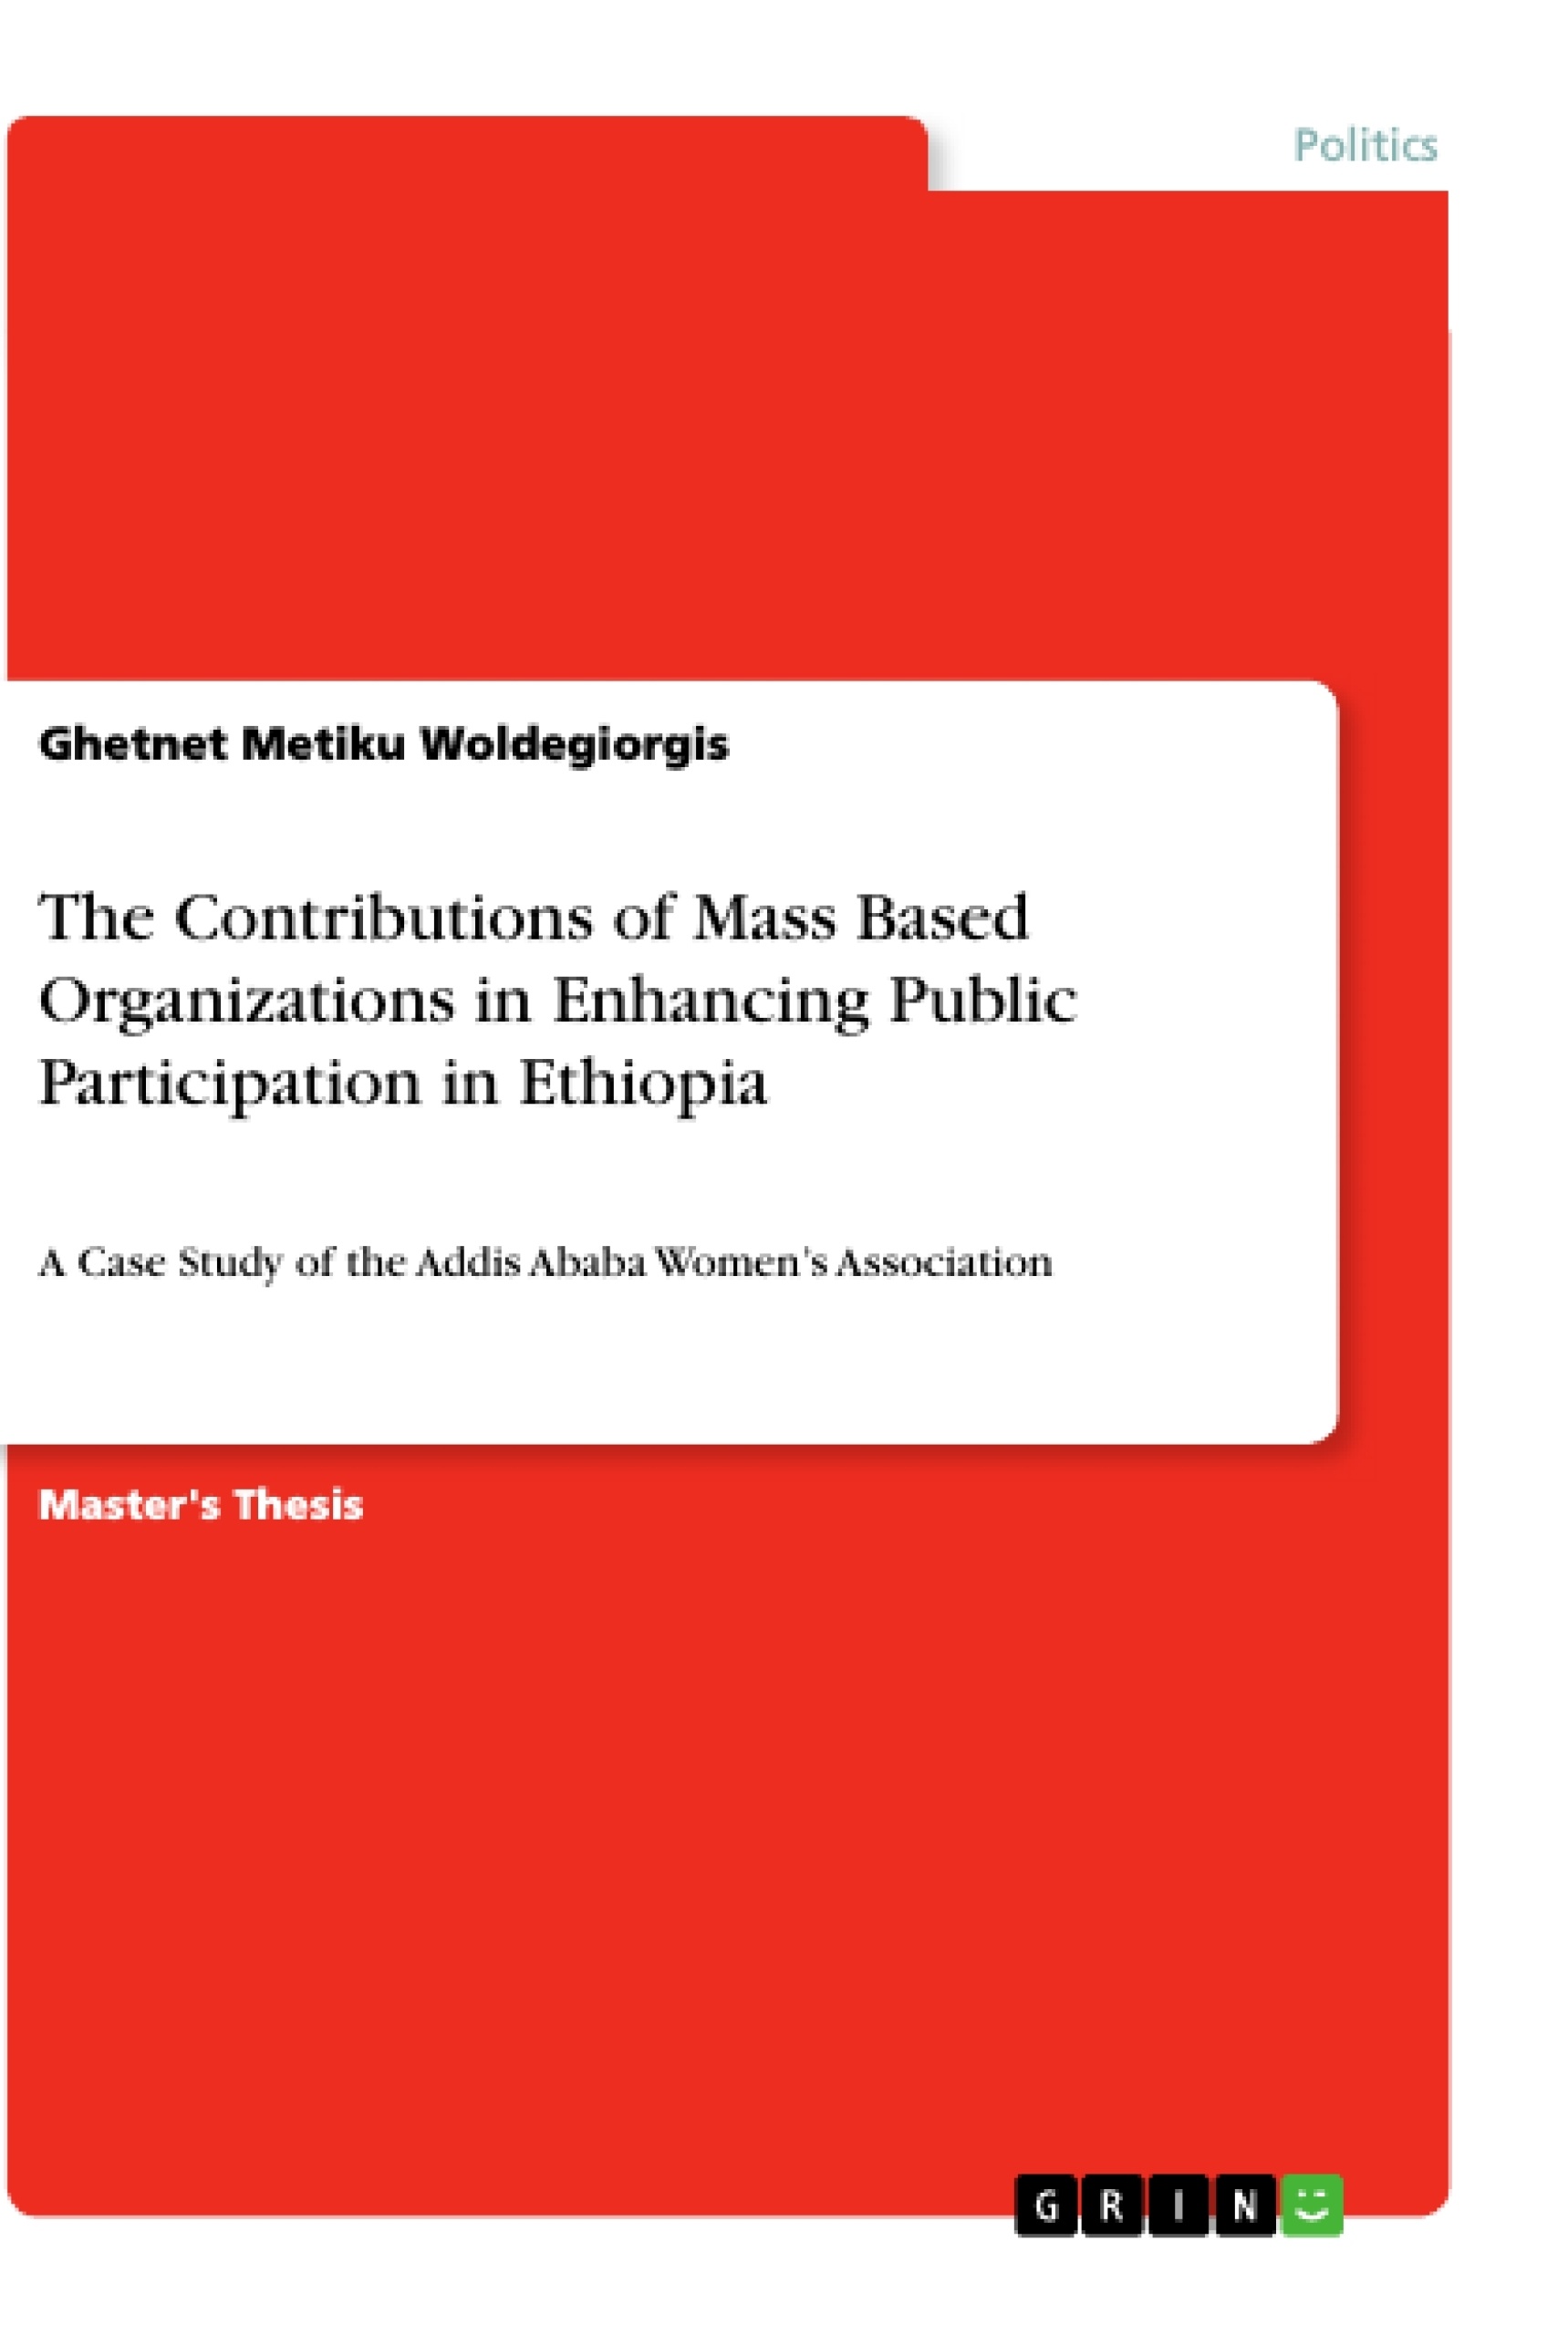 Title: The Contributions of Mass Based Organizations in Enhancing Public Participation in Ethiopia